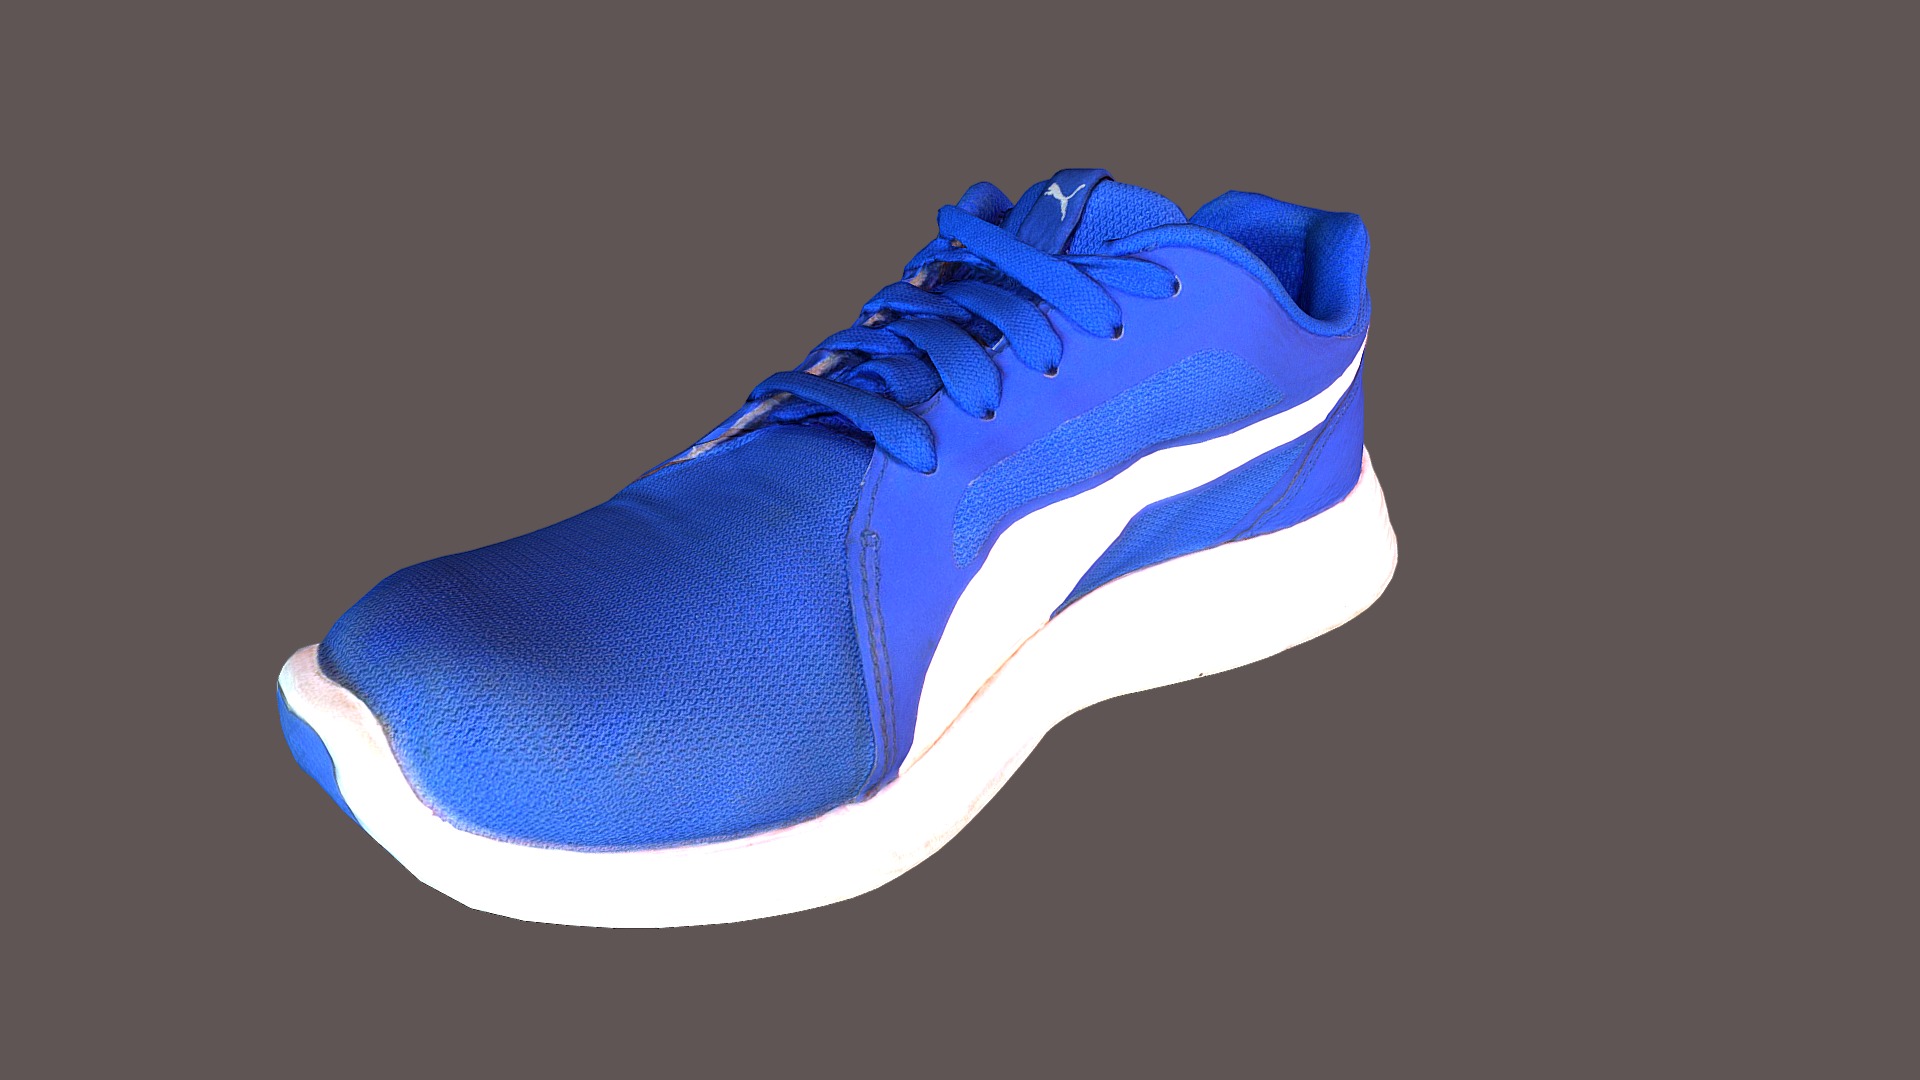 3D model Sneaker low poly 3D model - This is a 3D model of the Sneaker low poly 3D model. The 3D model is about a blue and white shoe.